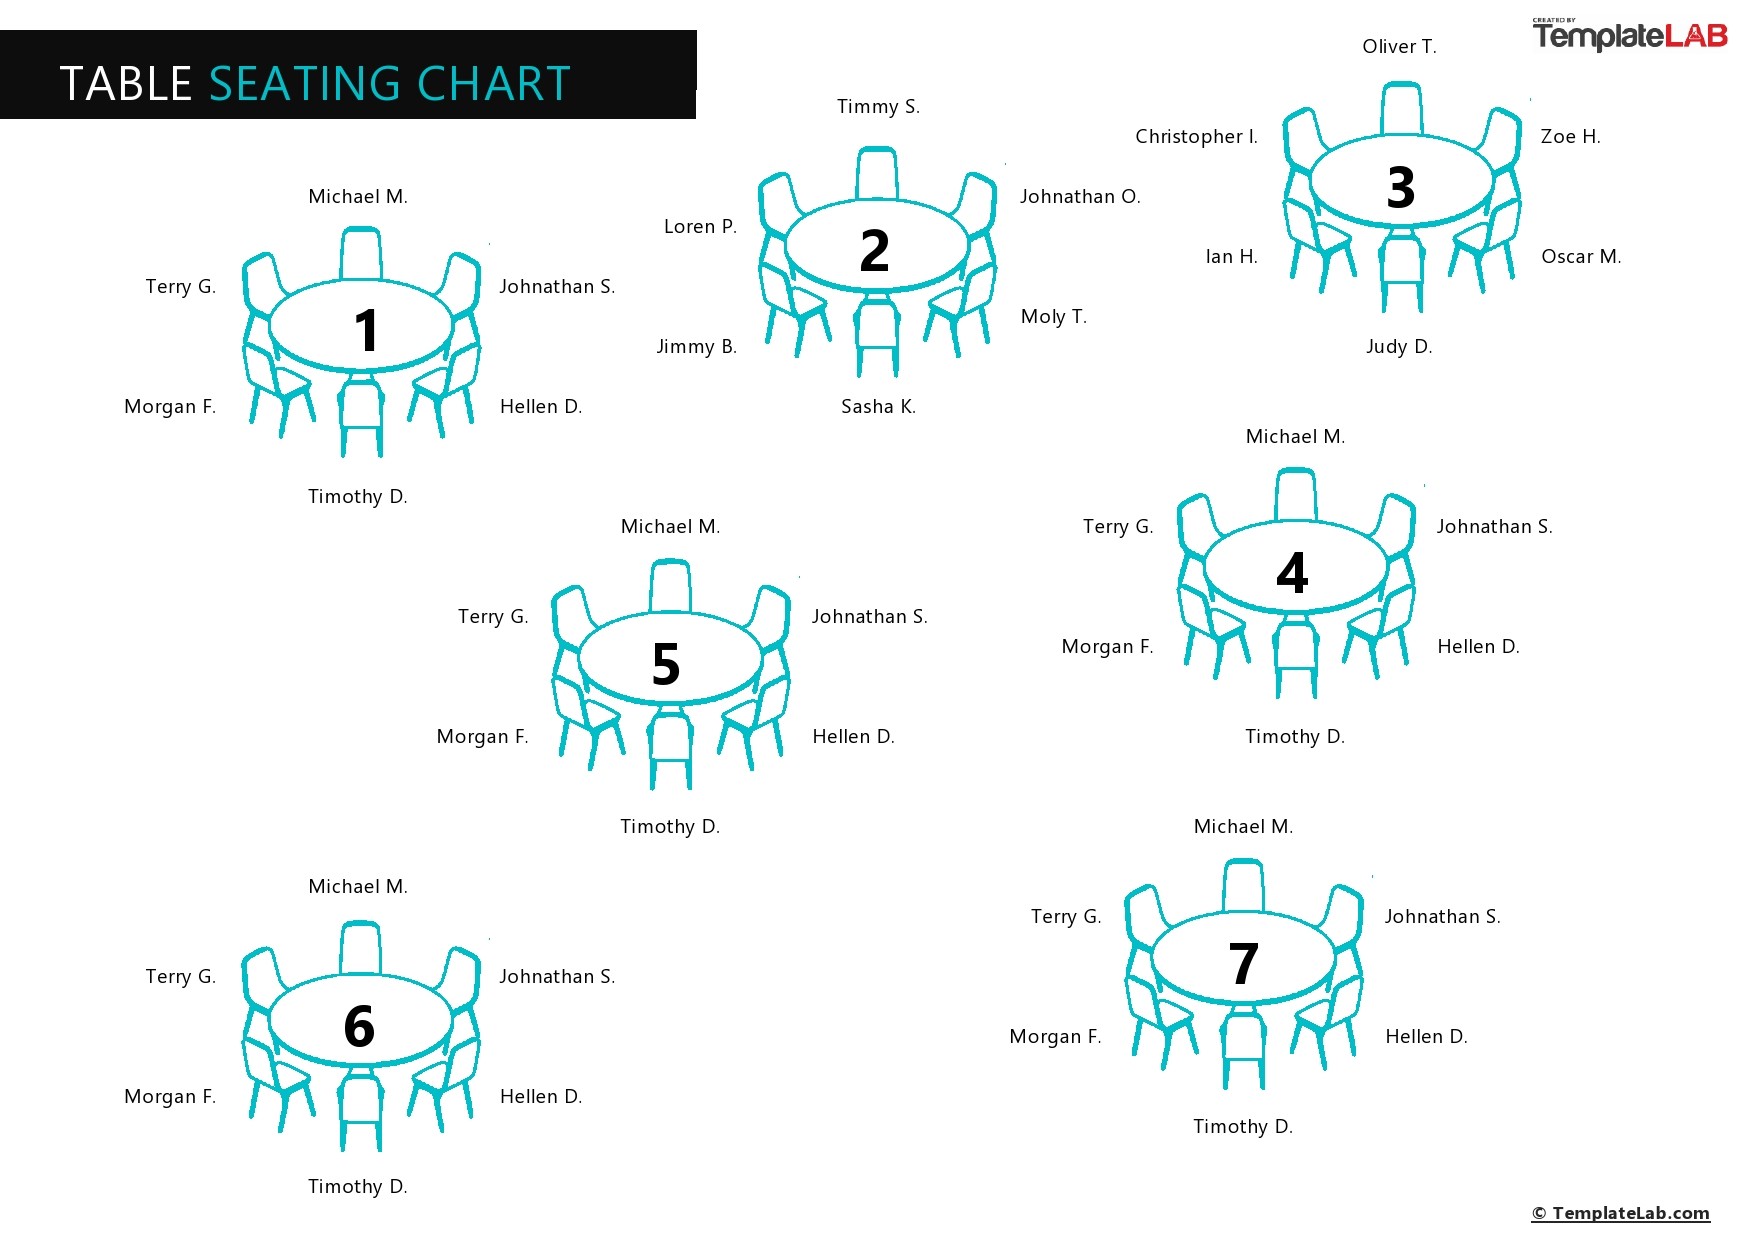  Table Seating Chart Template Microsoft Word Tutorial Pics